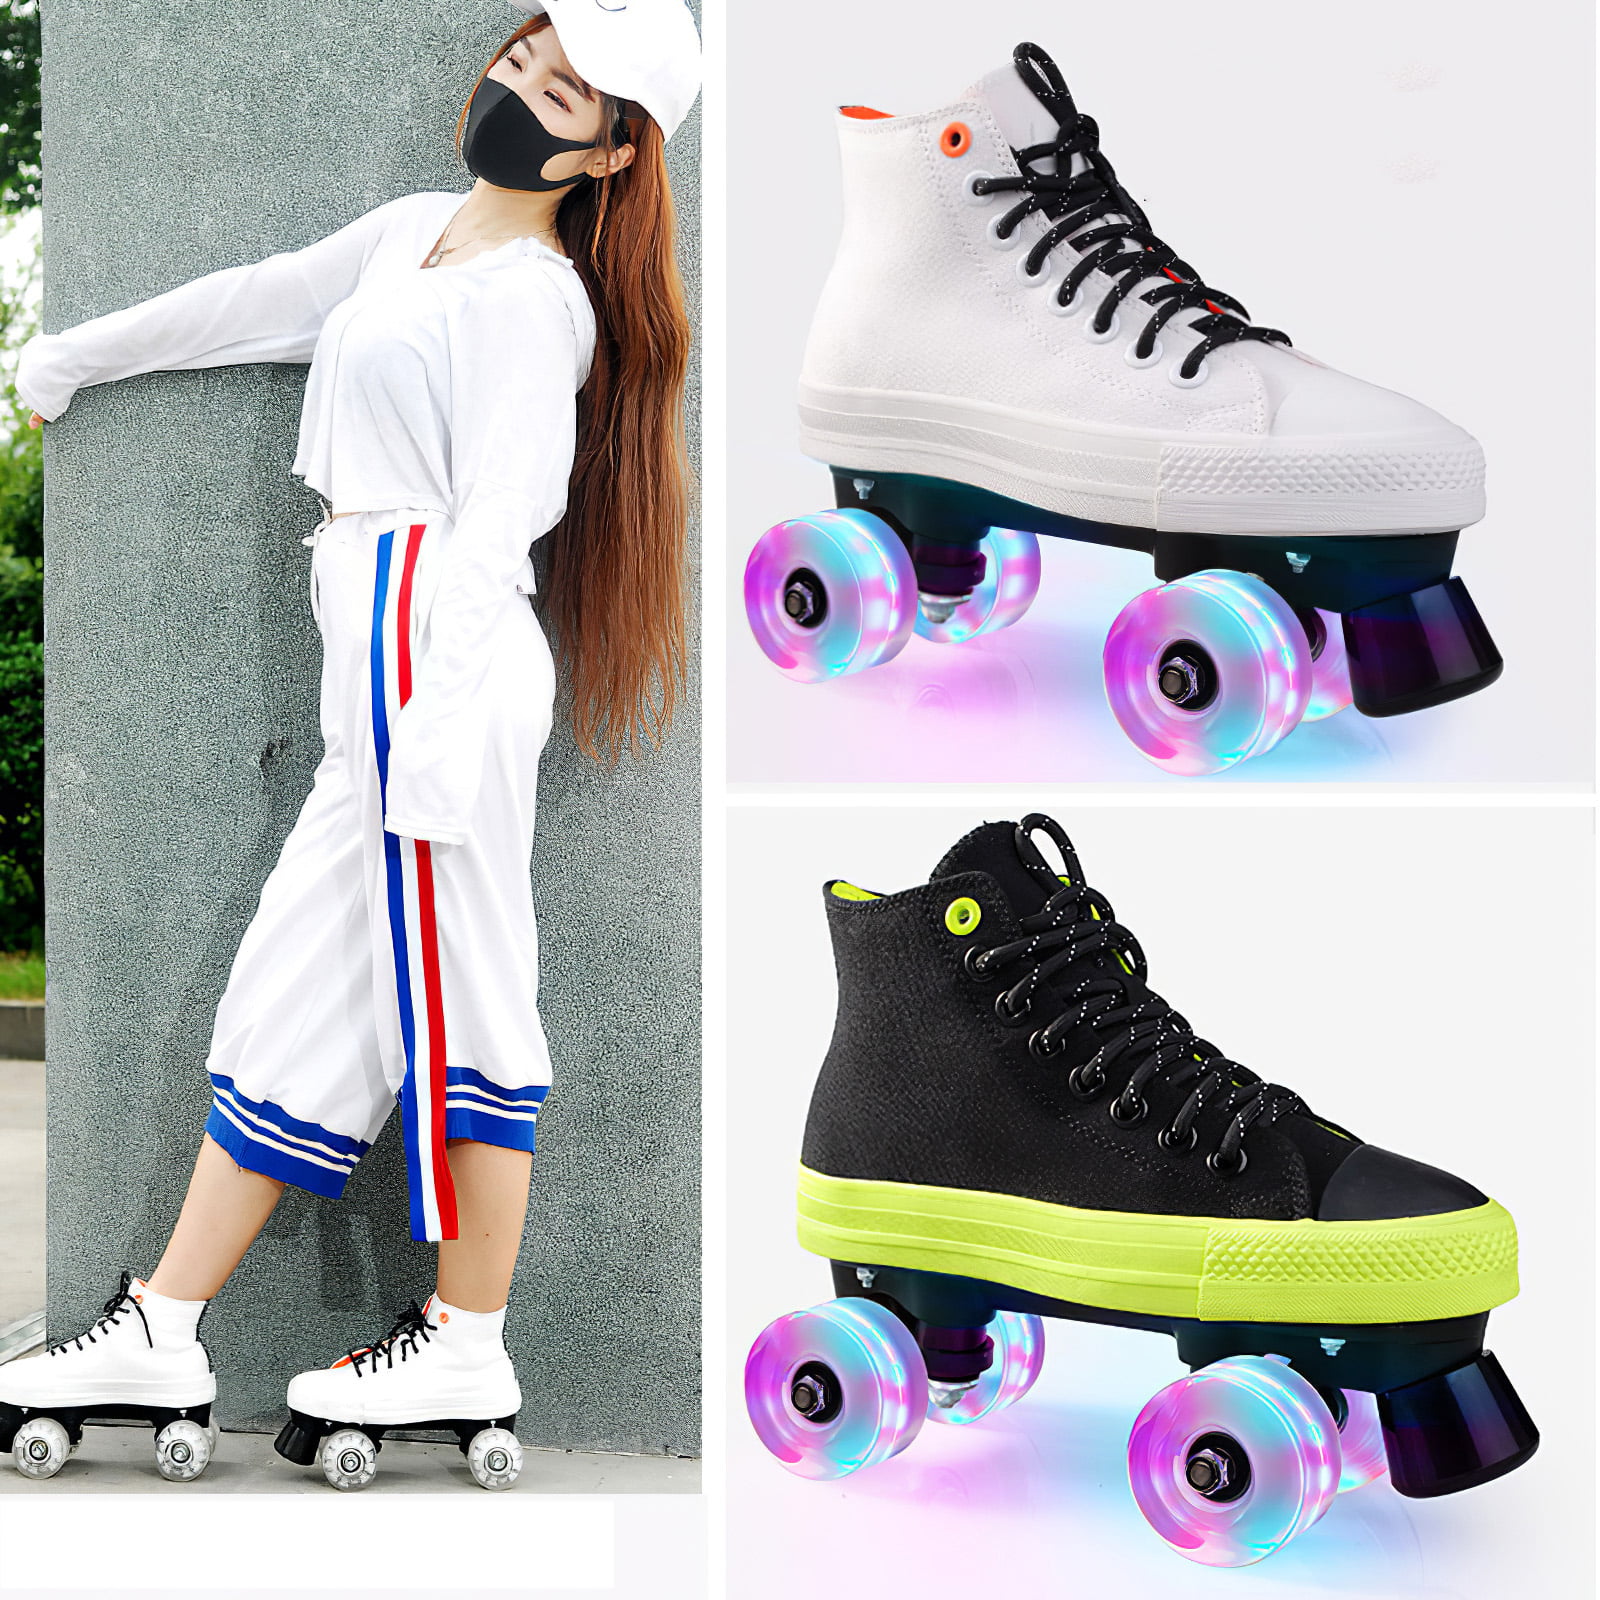 Magicorange 8 Pack Roller Skate Wheels with Bearings Installed Light Up Luminous Quad Wheels for Indoor or Outdoor Double Row Skating and Skateboard 32mm x 58mm 78A 